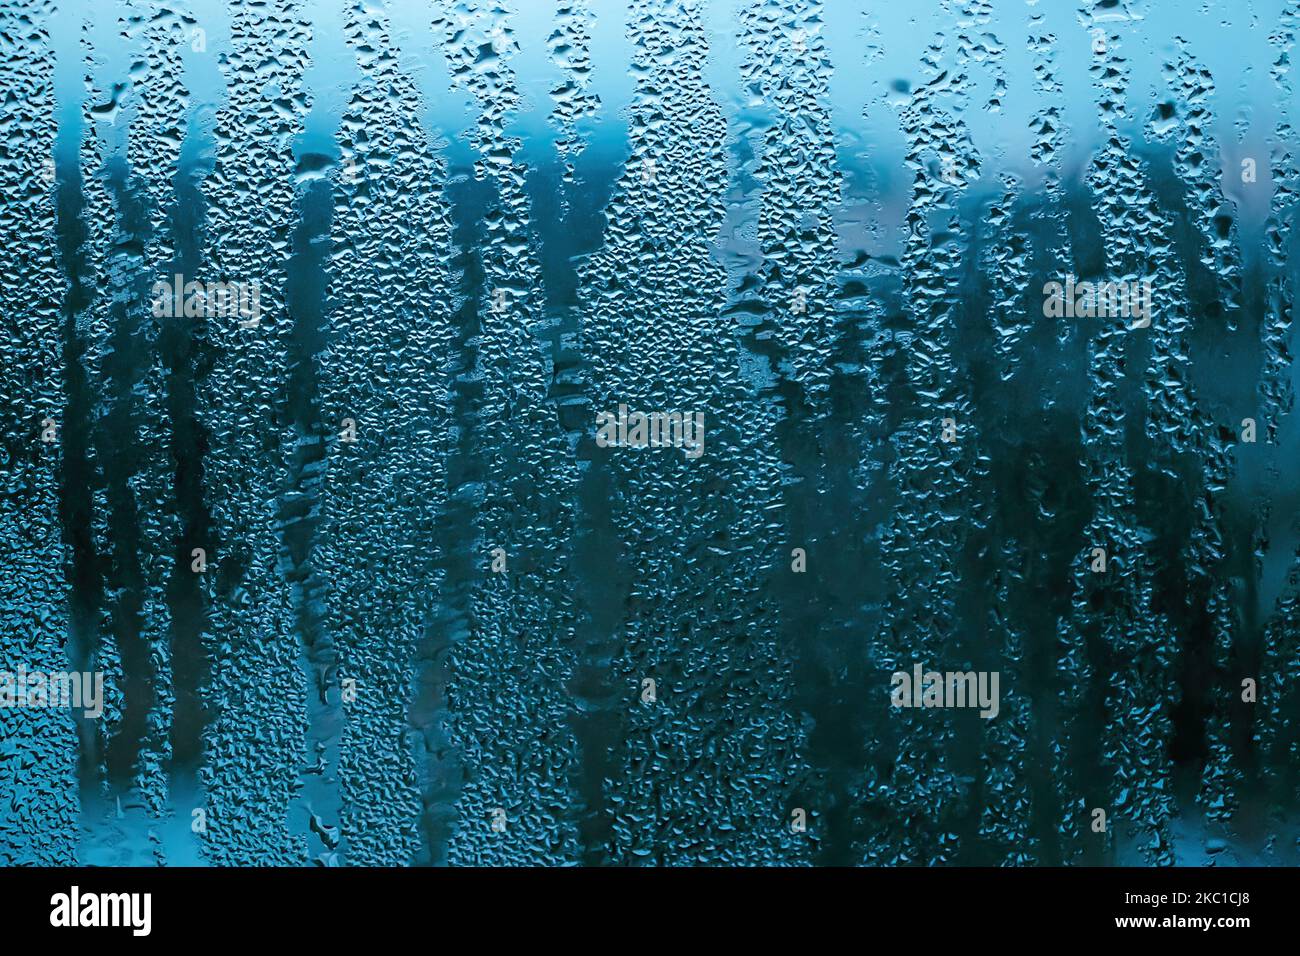 Texture of misted glass in autumn. Drops of water on window in rainy weather. Abstract background. Stock Photo